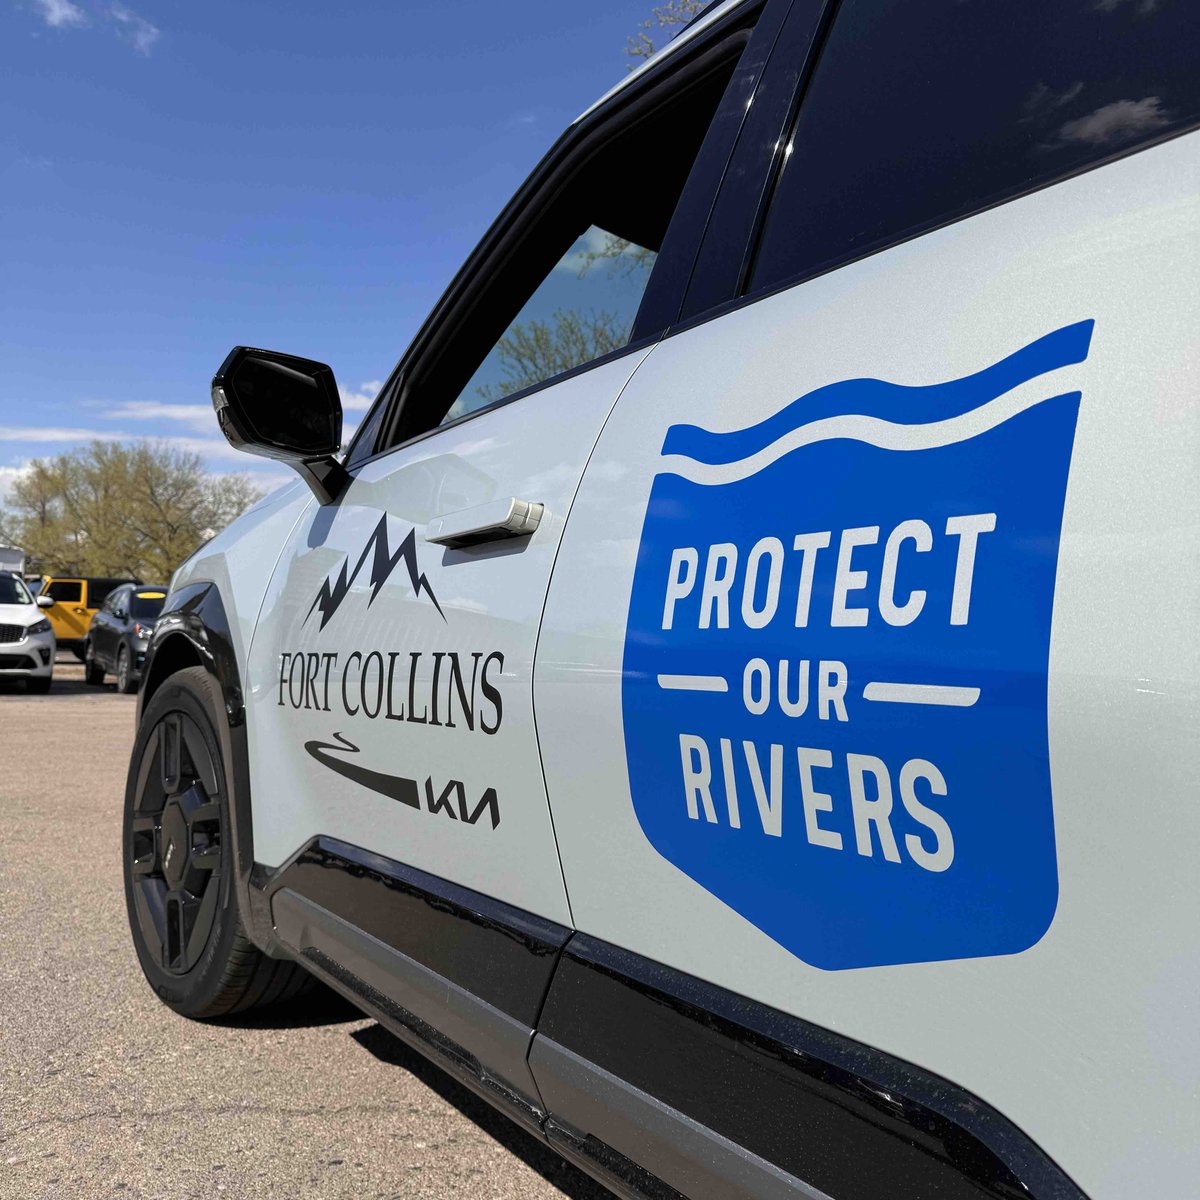 See you tomorrow at the Poudre River Cleanup tomorrow! #FortCollins #Kia #RiverCleanup